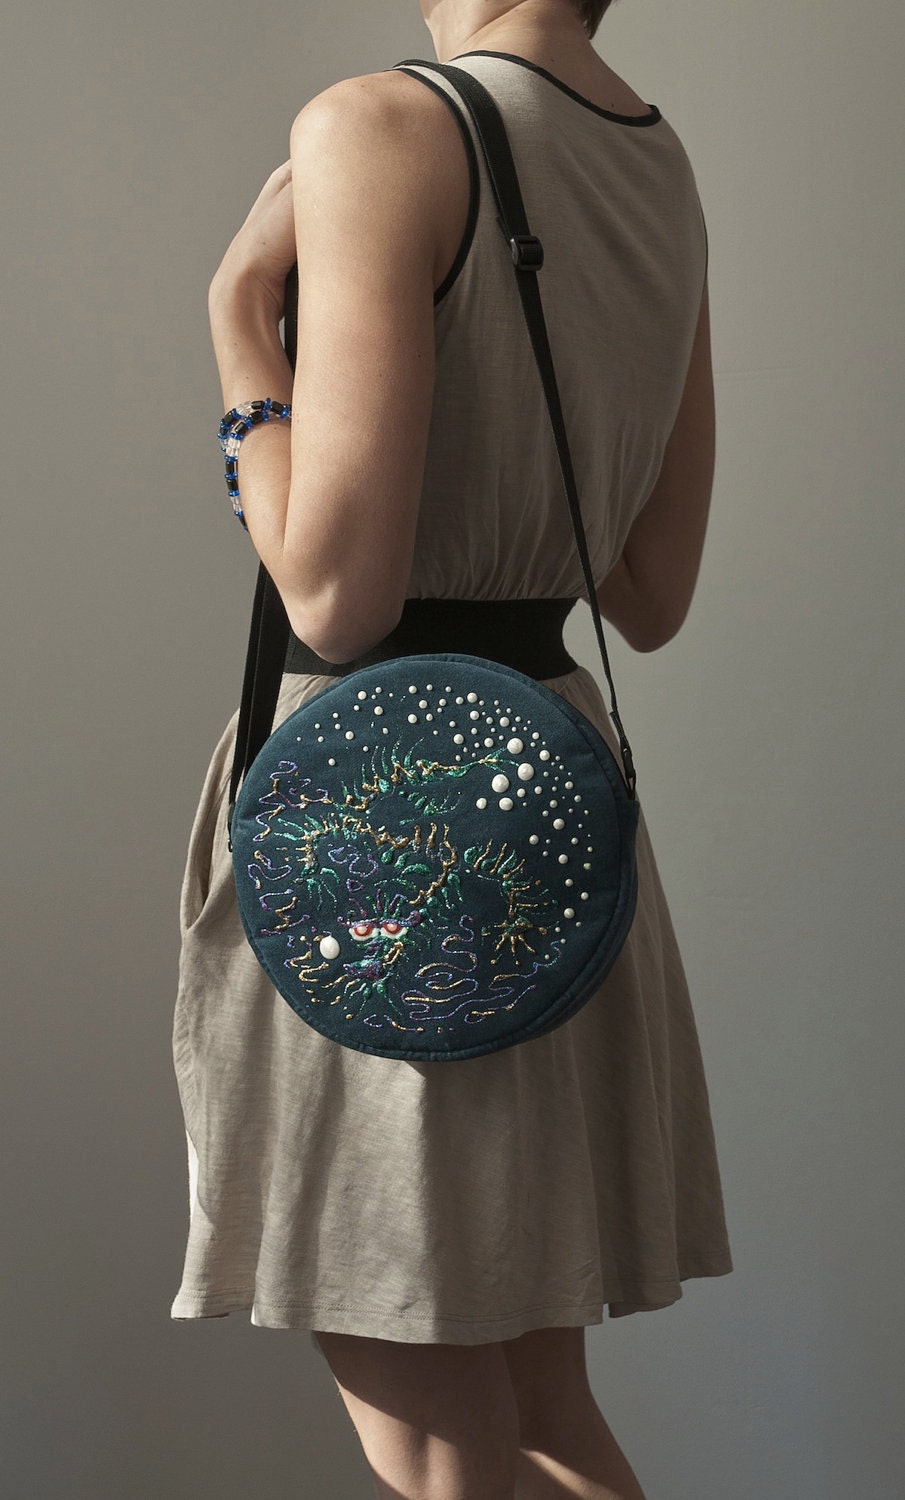 Round Purse Bag Turquoise Bag Asian Water Dragon Hand Painted Bag Teal Cross Body Bag Purse Velour Bag Acrylic Painting - Marewo